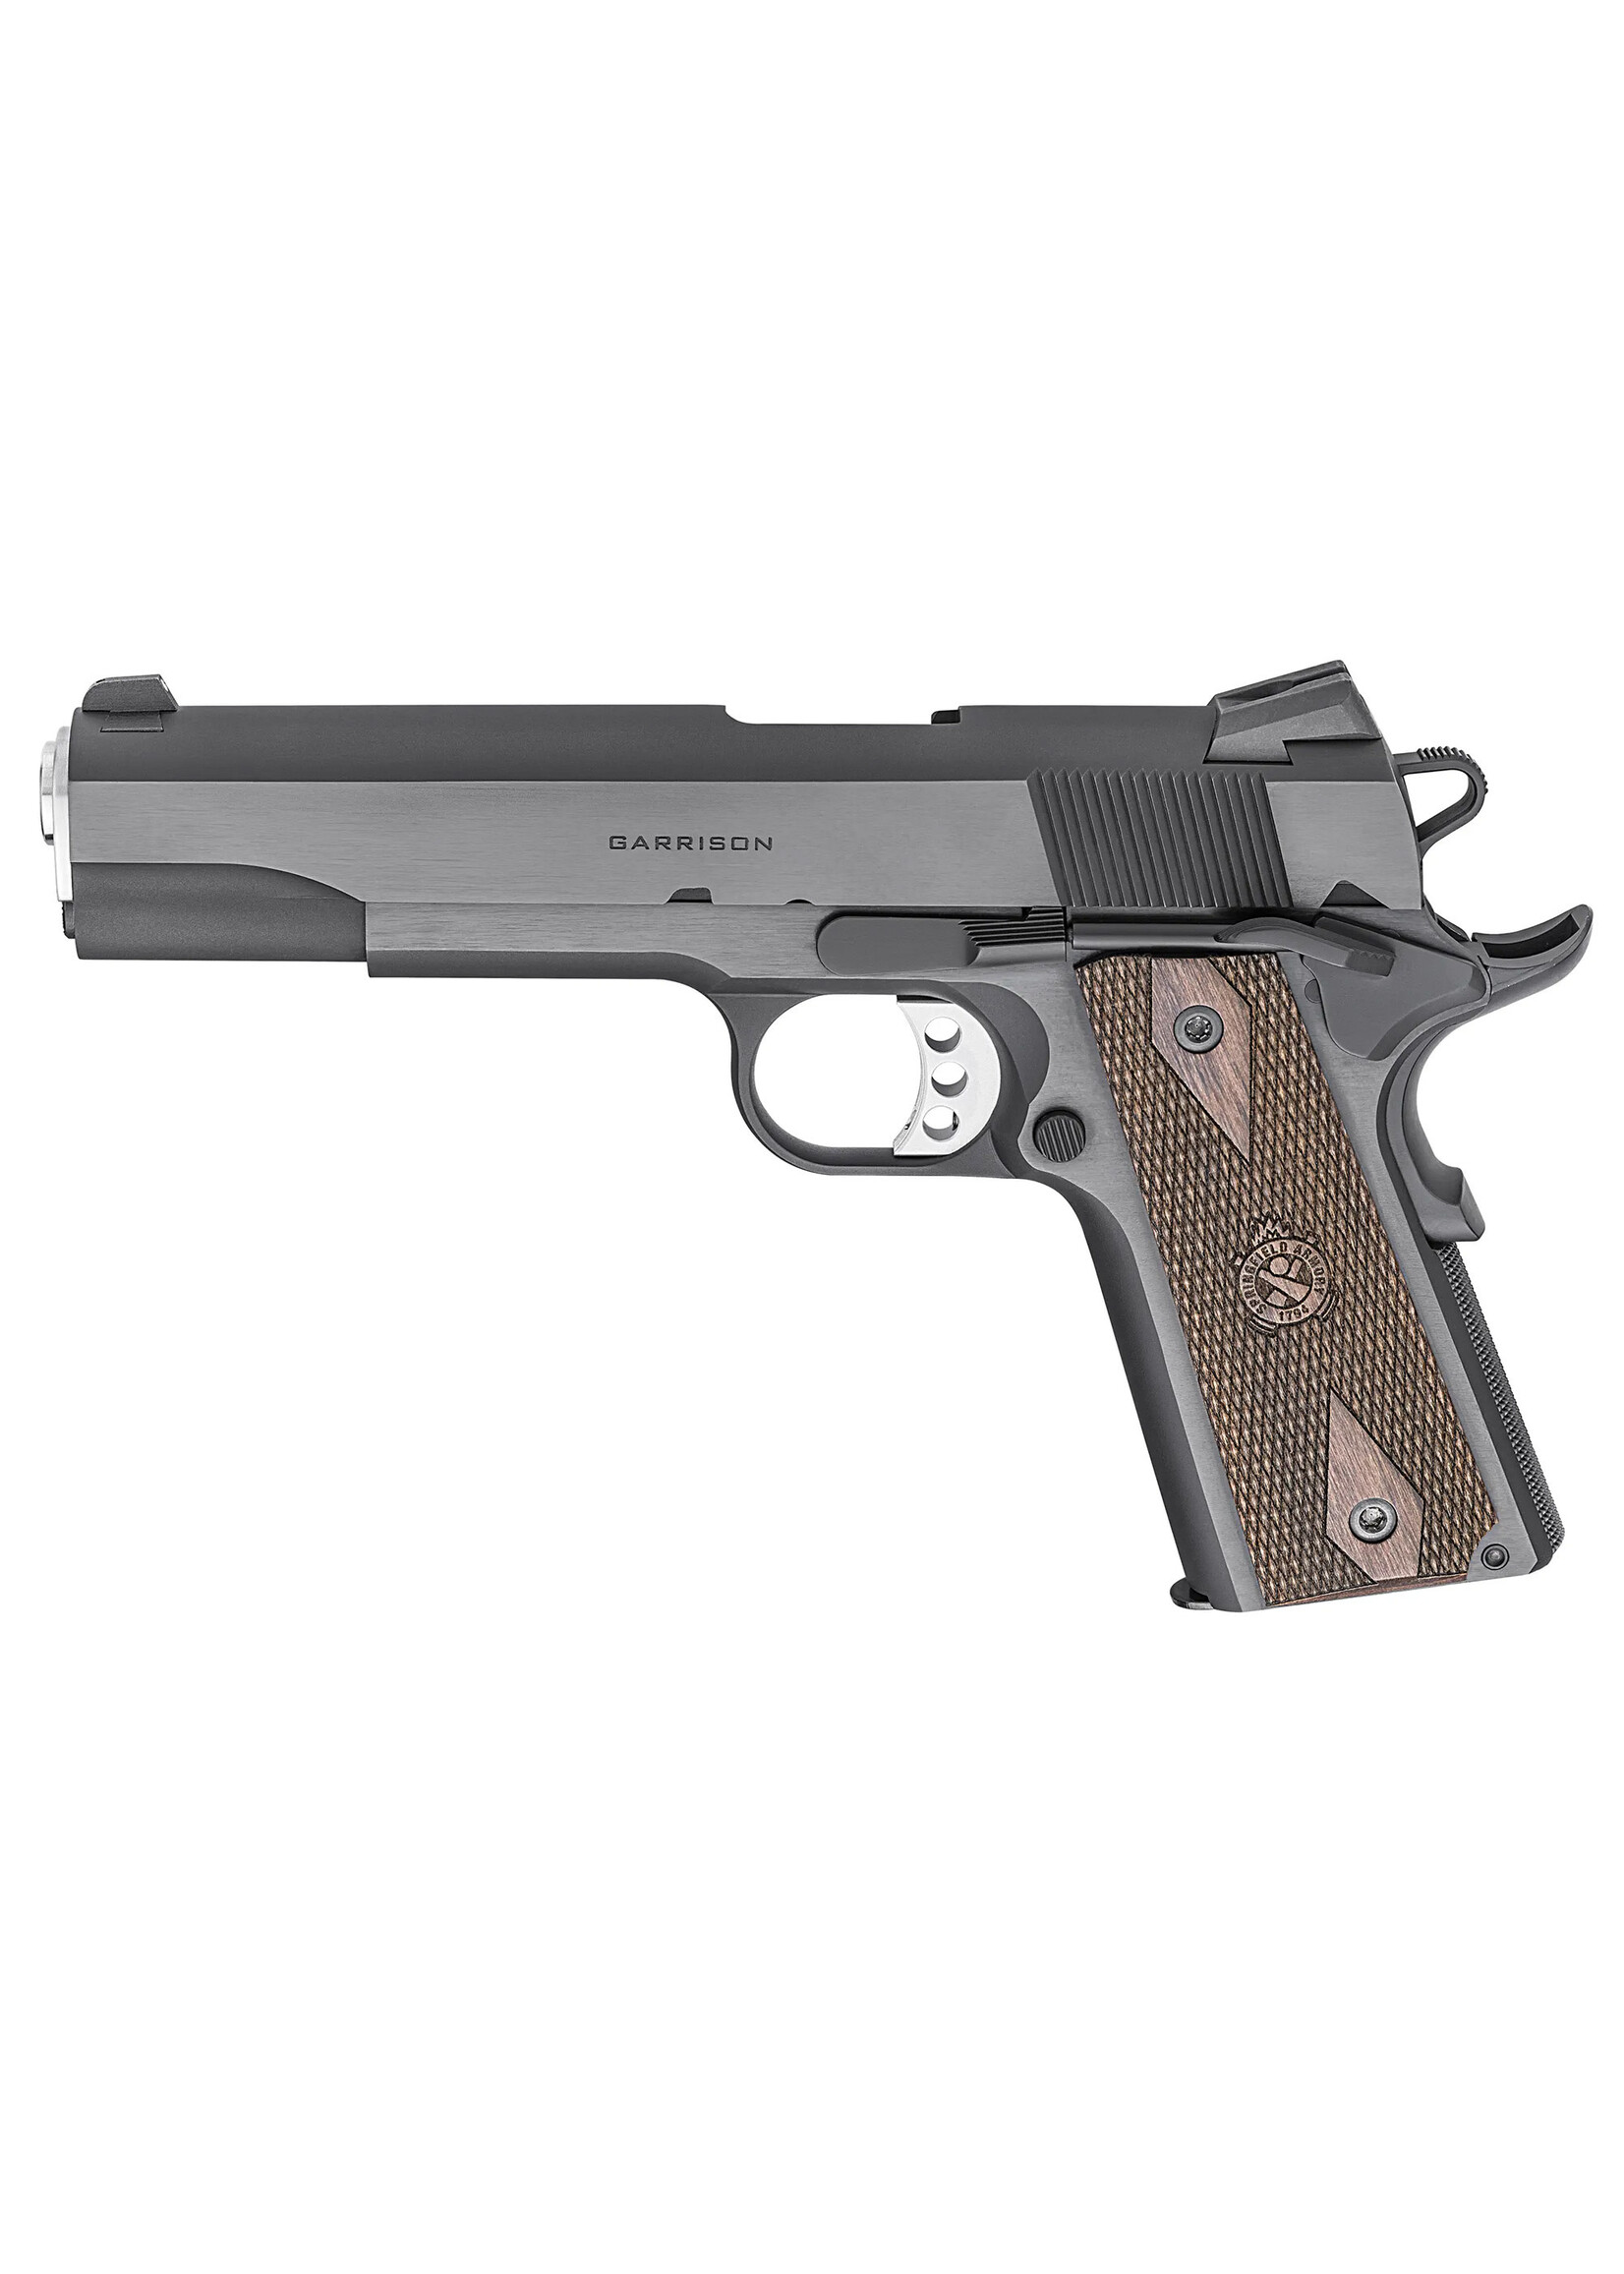 Springfield Armory Springfield Armory PX9420 1911 Garrison 45 ACP 7+1 5" Barrel, Blued Carbon Steel Frame w/Beavertail, Serrated Slide, Thin-Line Wood Grips Feature Double-Diamond Pattern & Crossed Cannon Logo, SAO